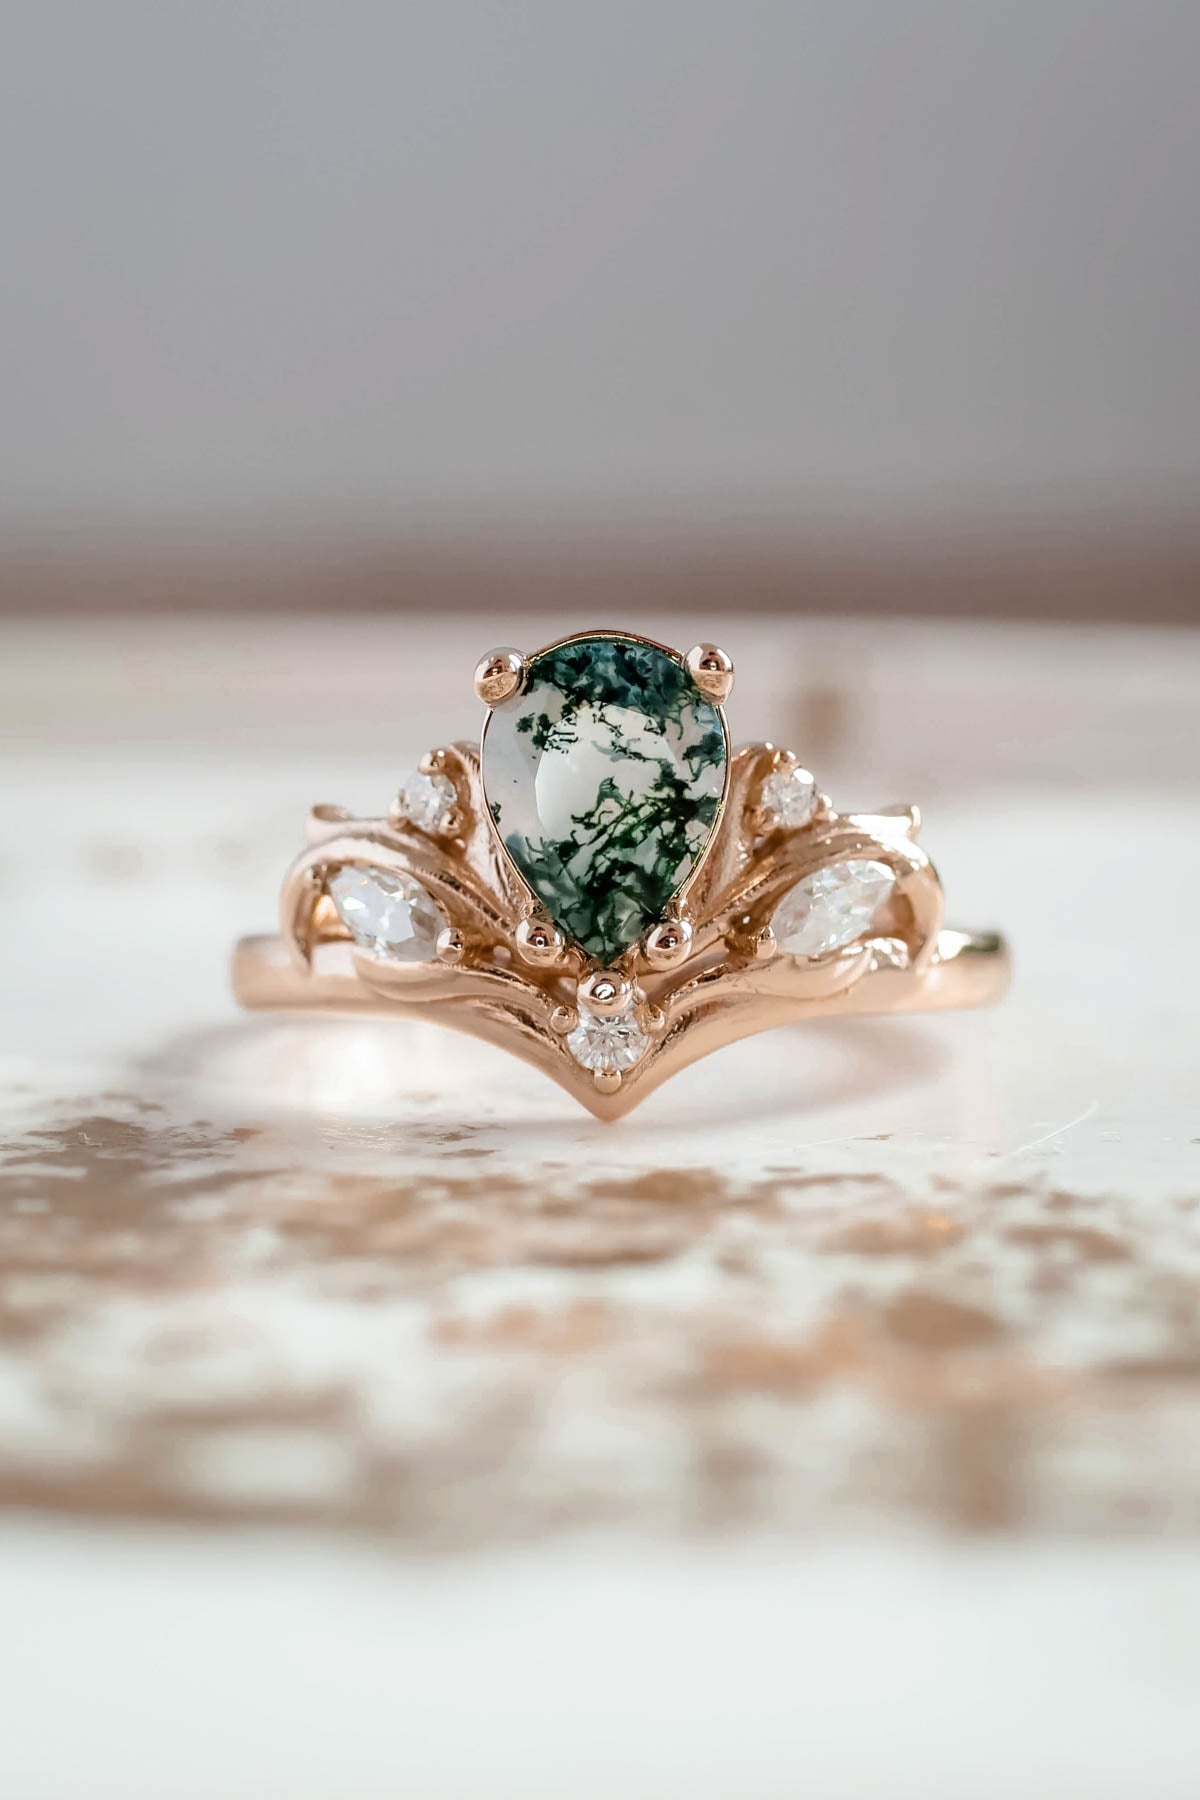 Big pear moss agate engagement ring, one of a kind gemstone ring / Swanlake - Eden Garden Jewelry™